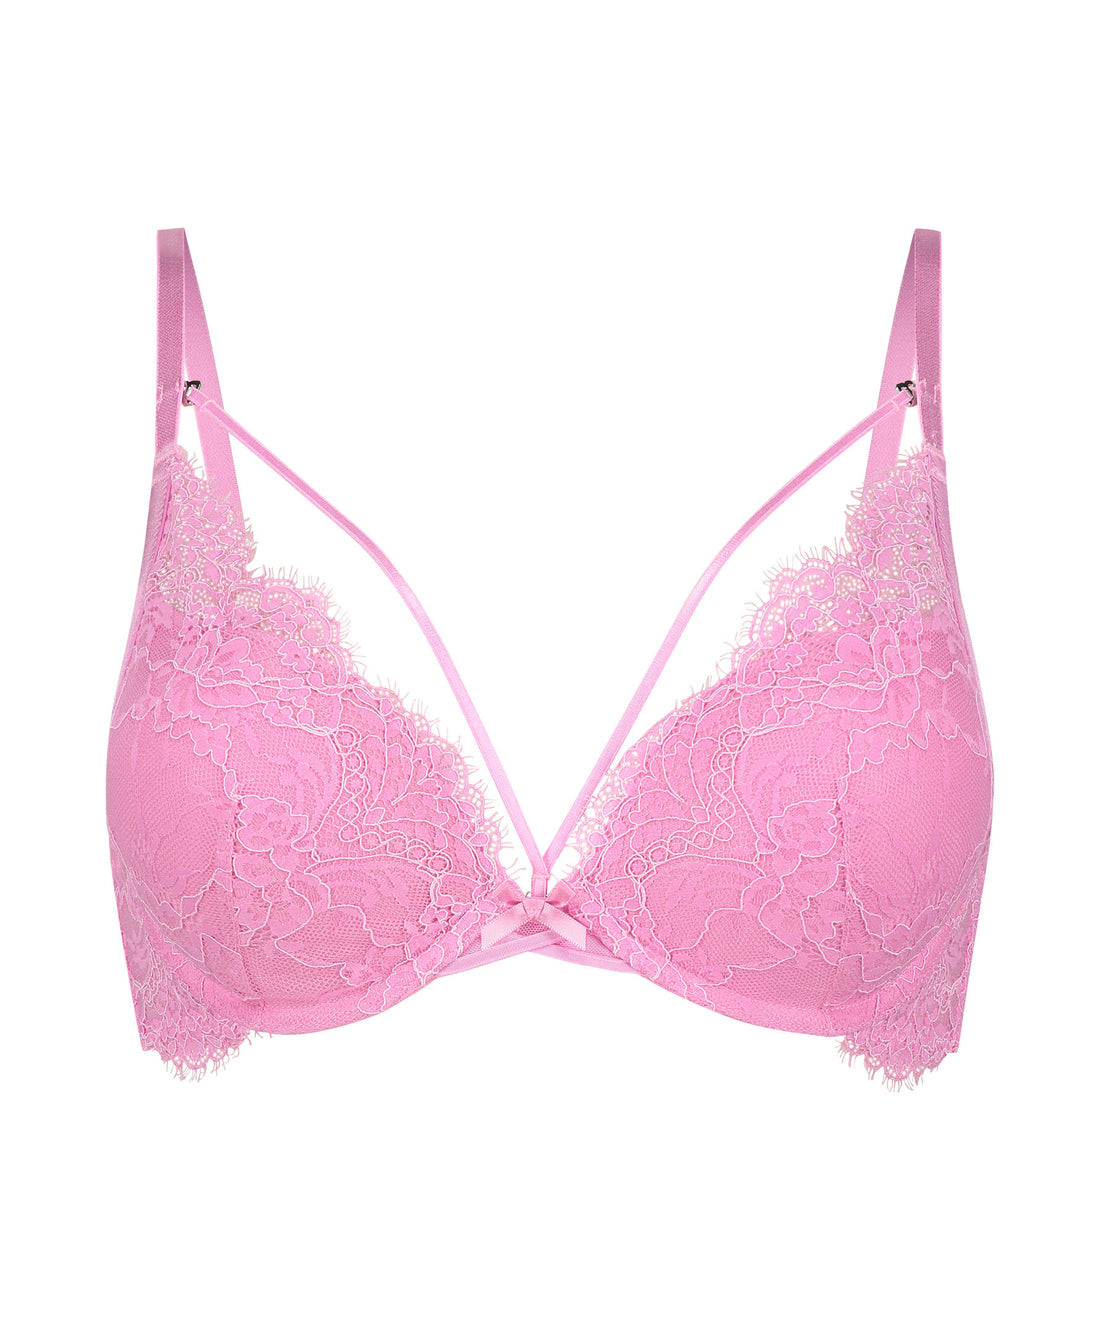 Arabella Push Up Bra In Different Cup Sizes_204592_Cyclamen_01